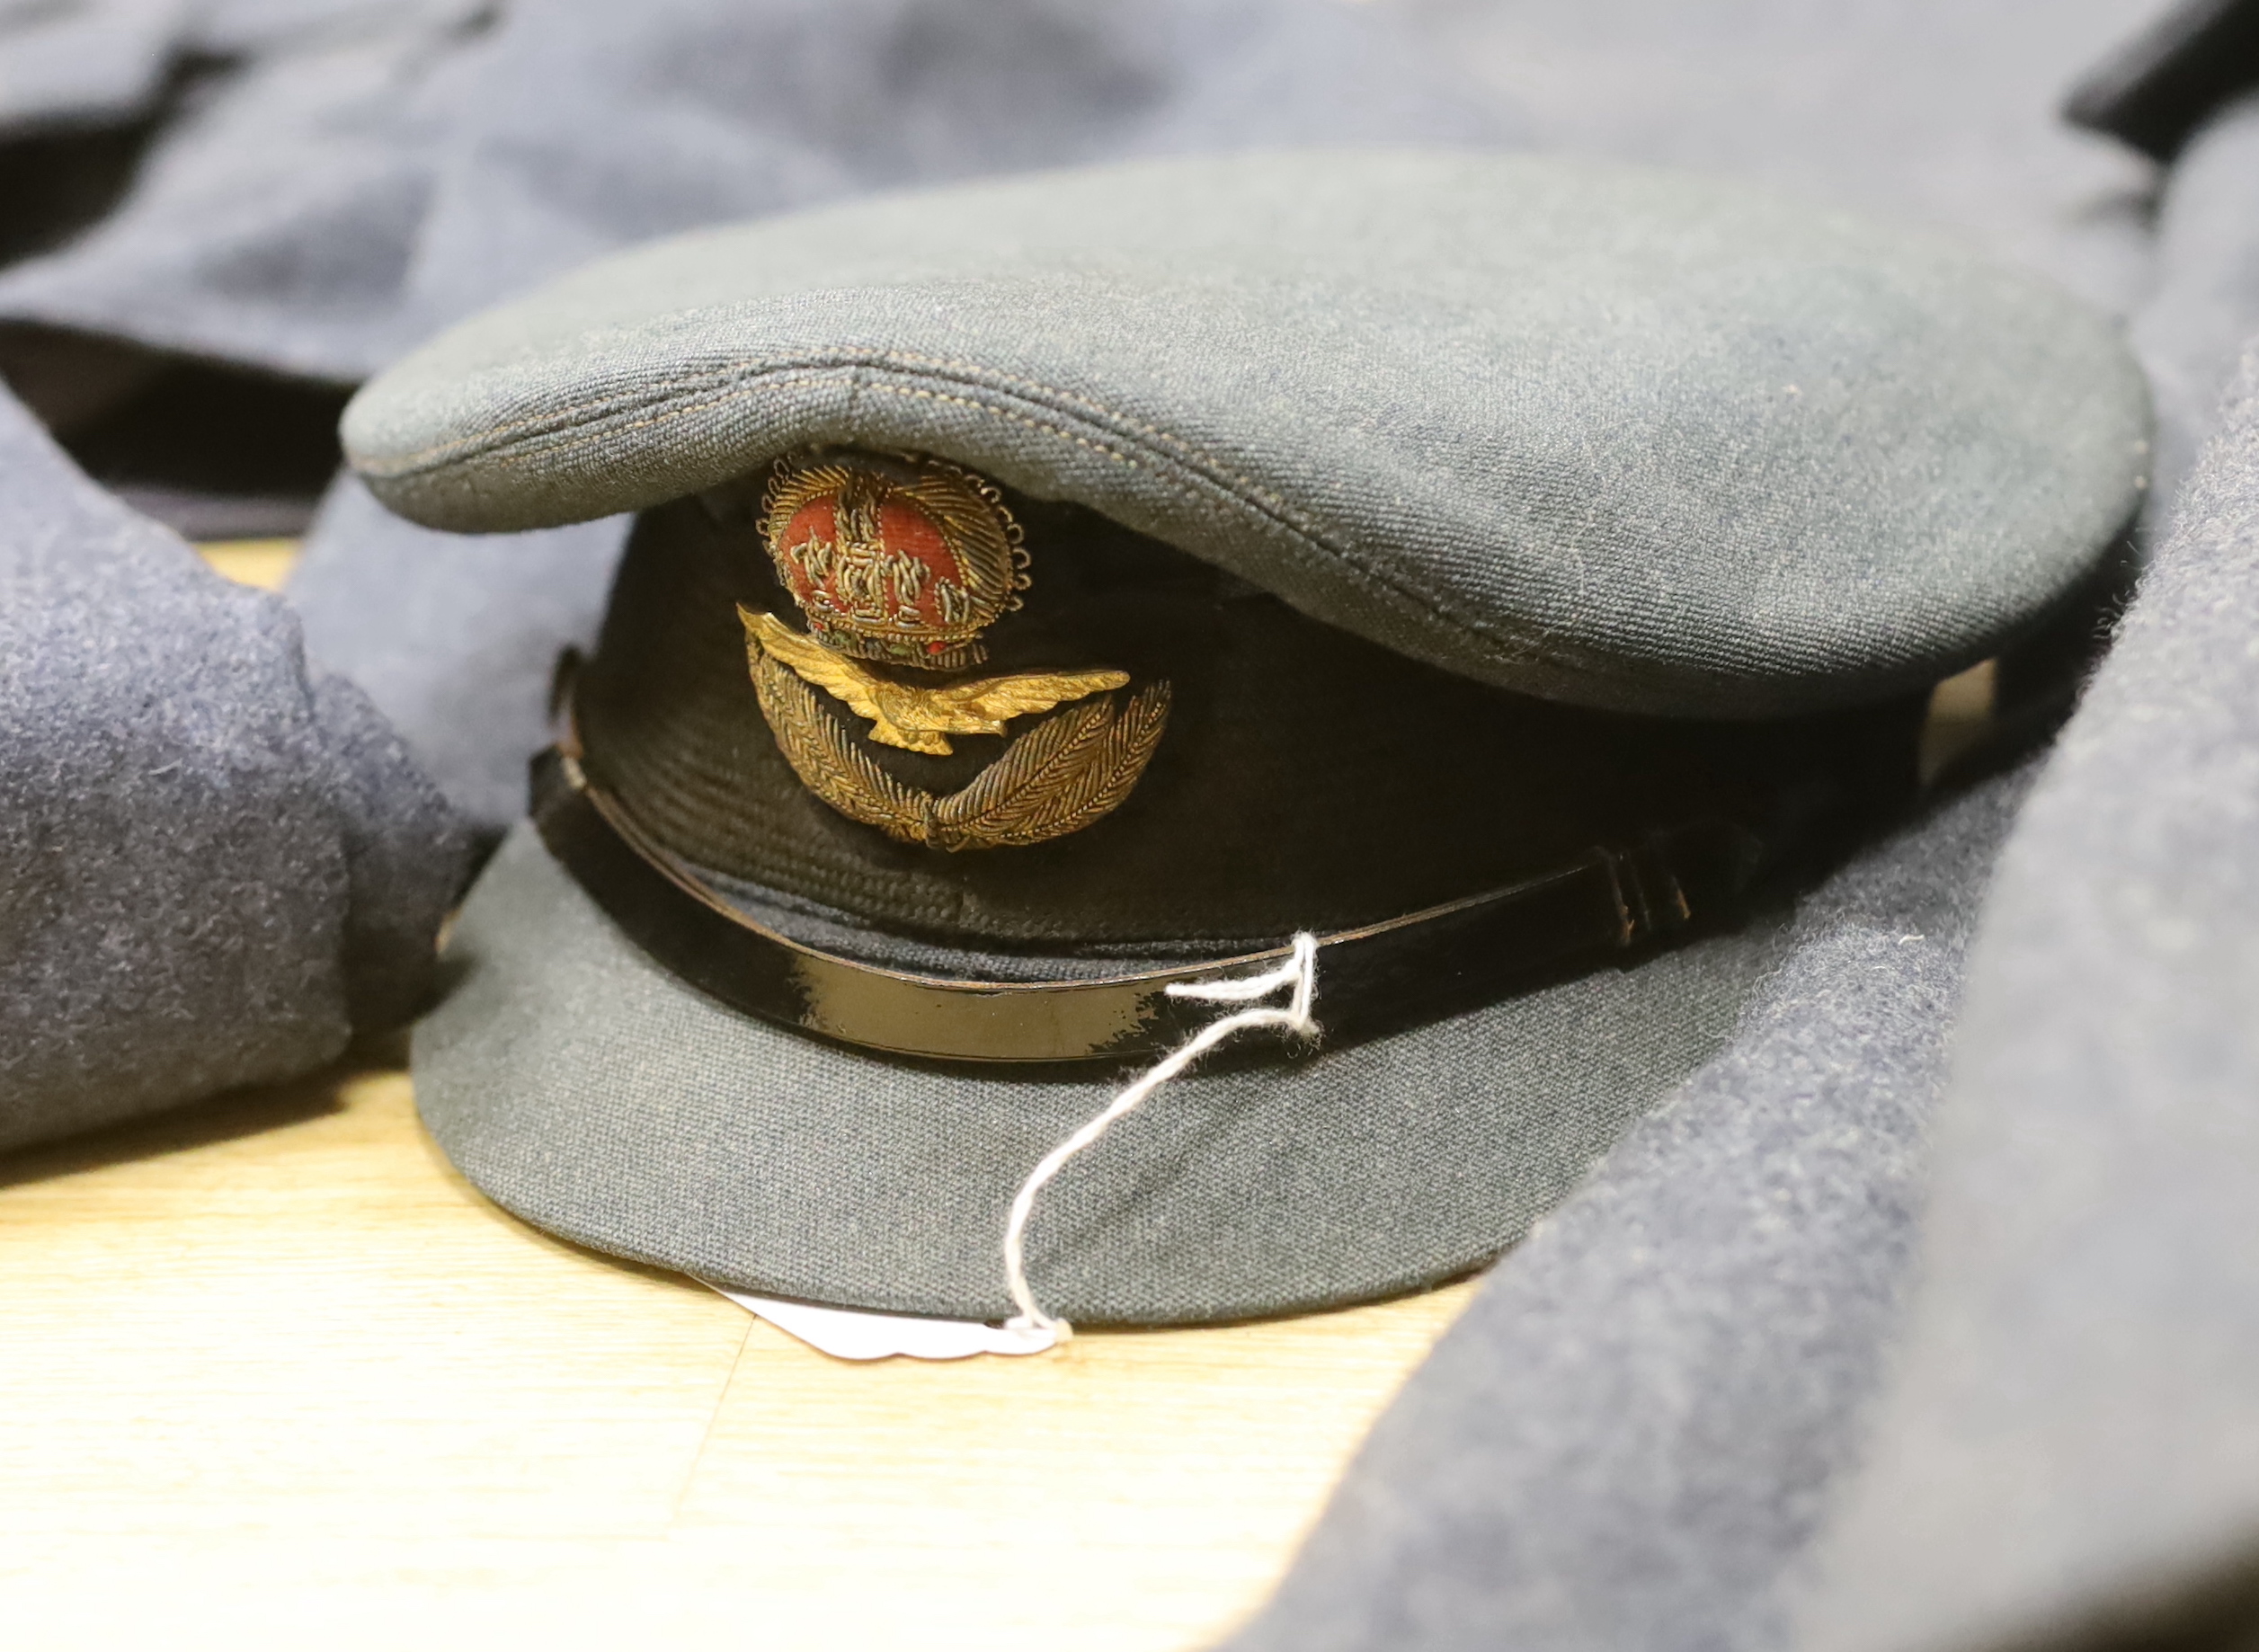 A 1960s RAF uniform comprising; great coat, blouse, cap and trousers, all with manufacturer’s labels, broad arrow markings, dates, etc.